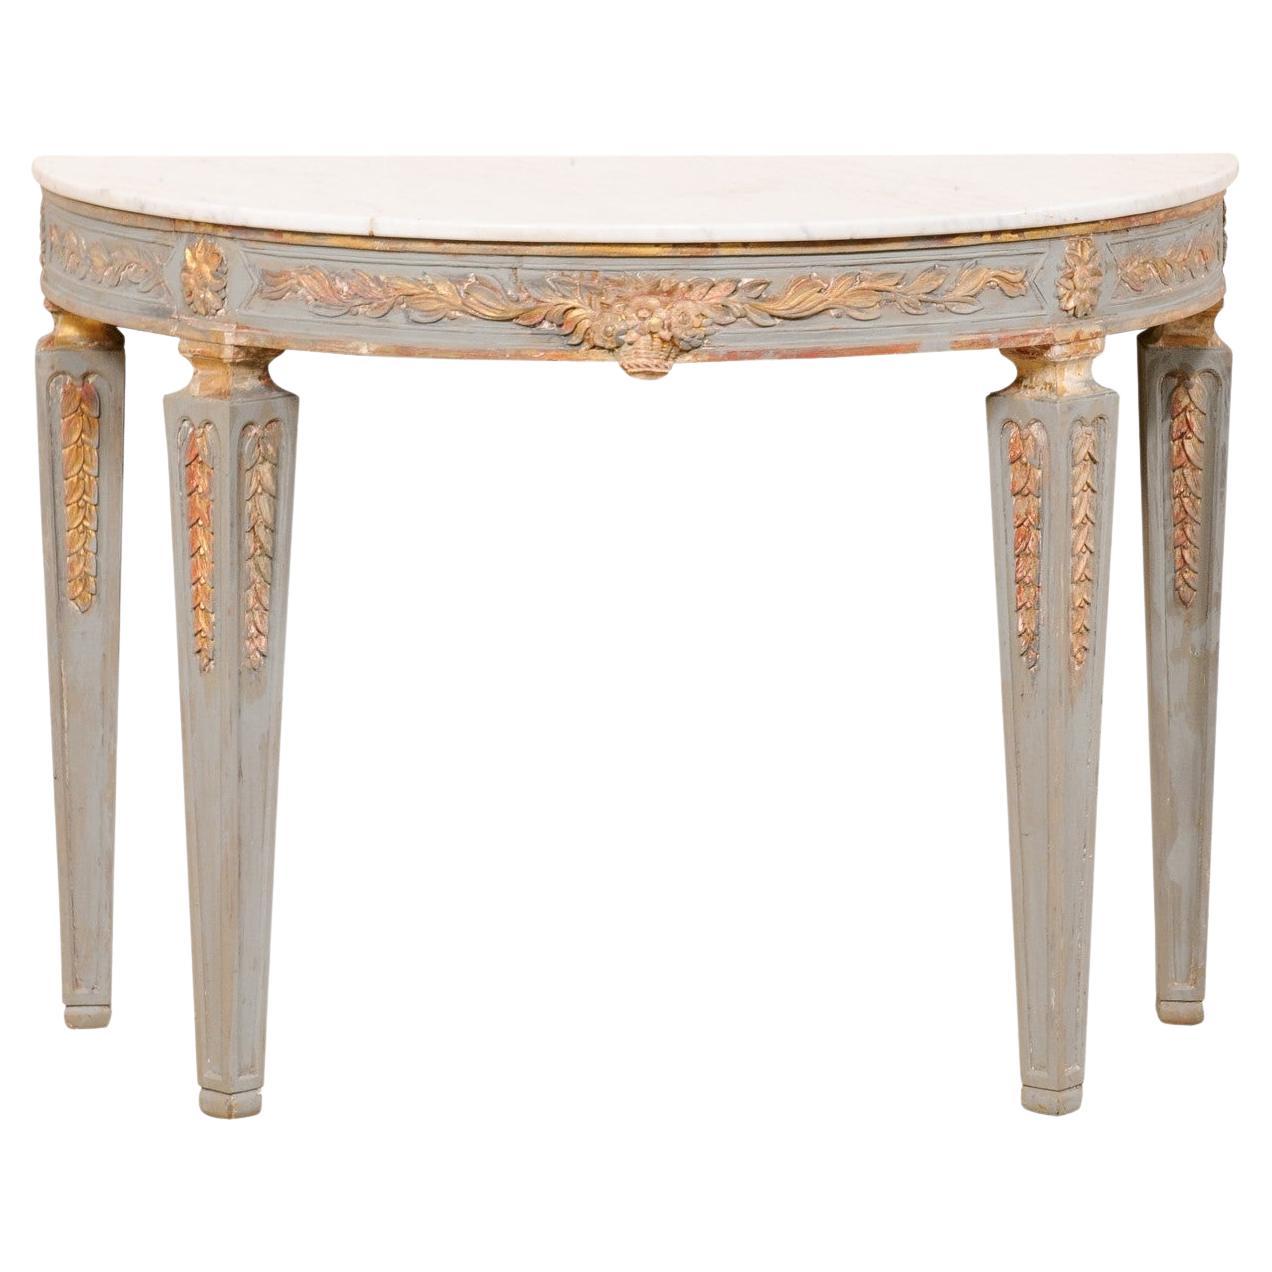 Italian Carved & Painted Demi-Lune Console Table with White Marble Top